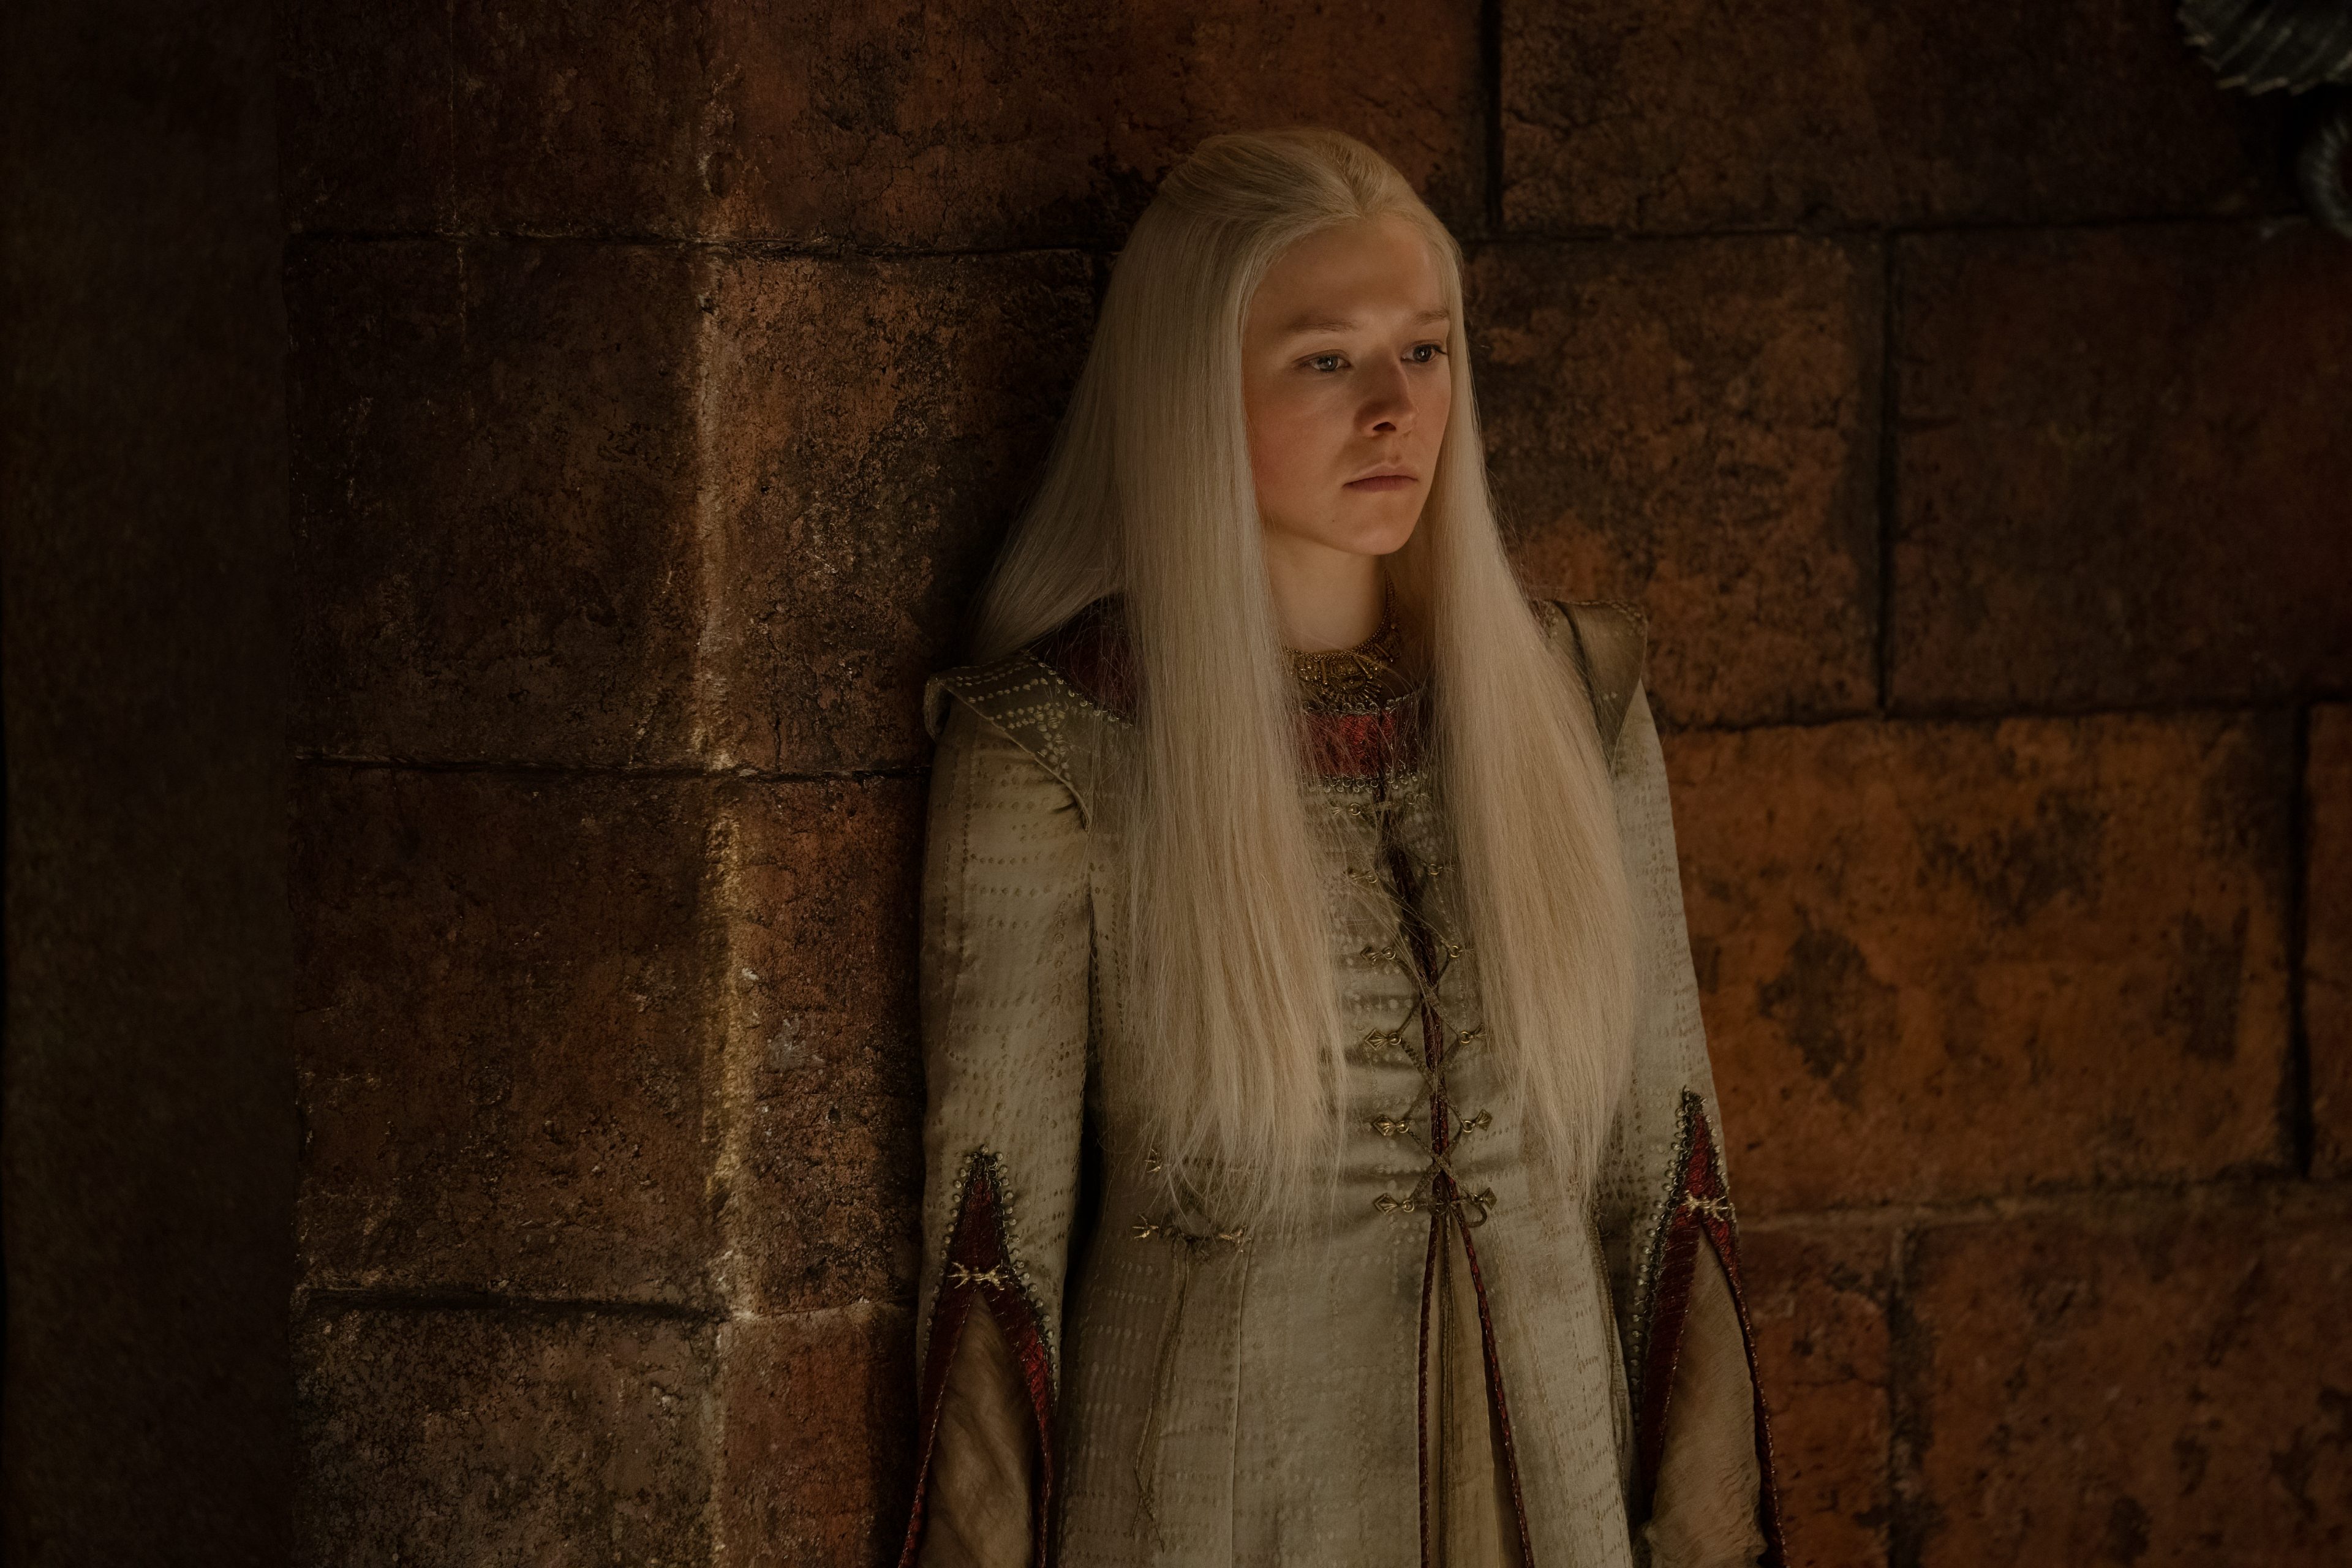 Who is Rhaenyra Targaryen? Milly Alcock and Emma D'Arcy character